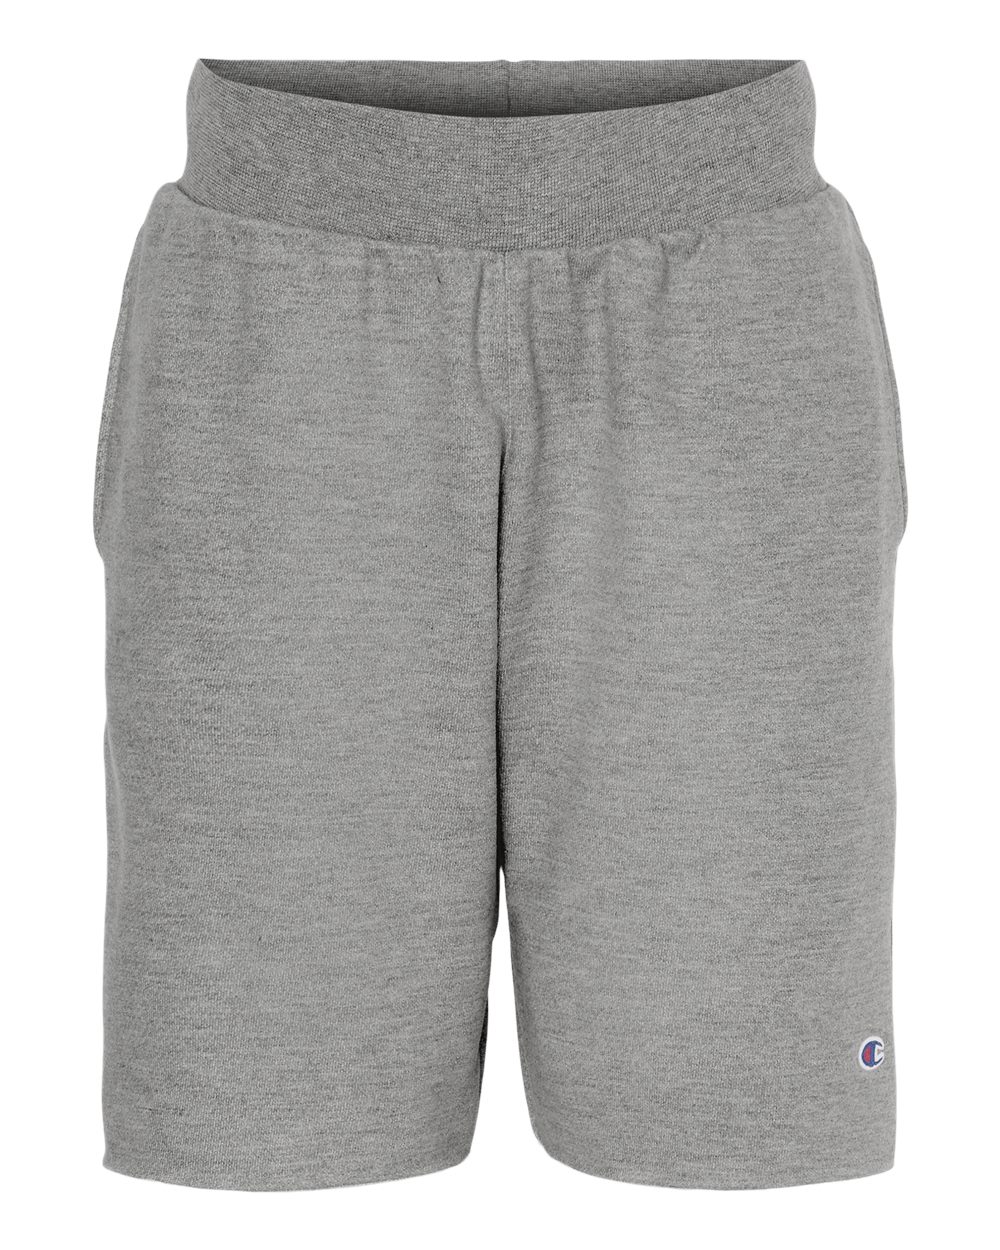 Champion&#xAE; - Reverse Weave Shorts - RW26 | 12 oz. Cotton/Poly Blend for Unmatched Quality and Style Active wear pants Step up style effortlessly